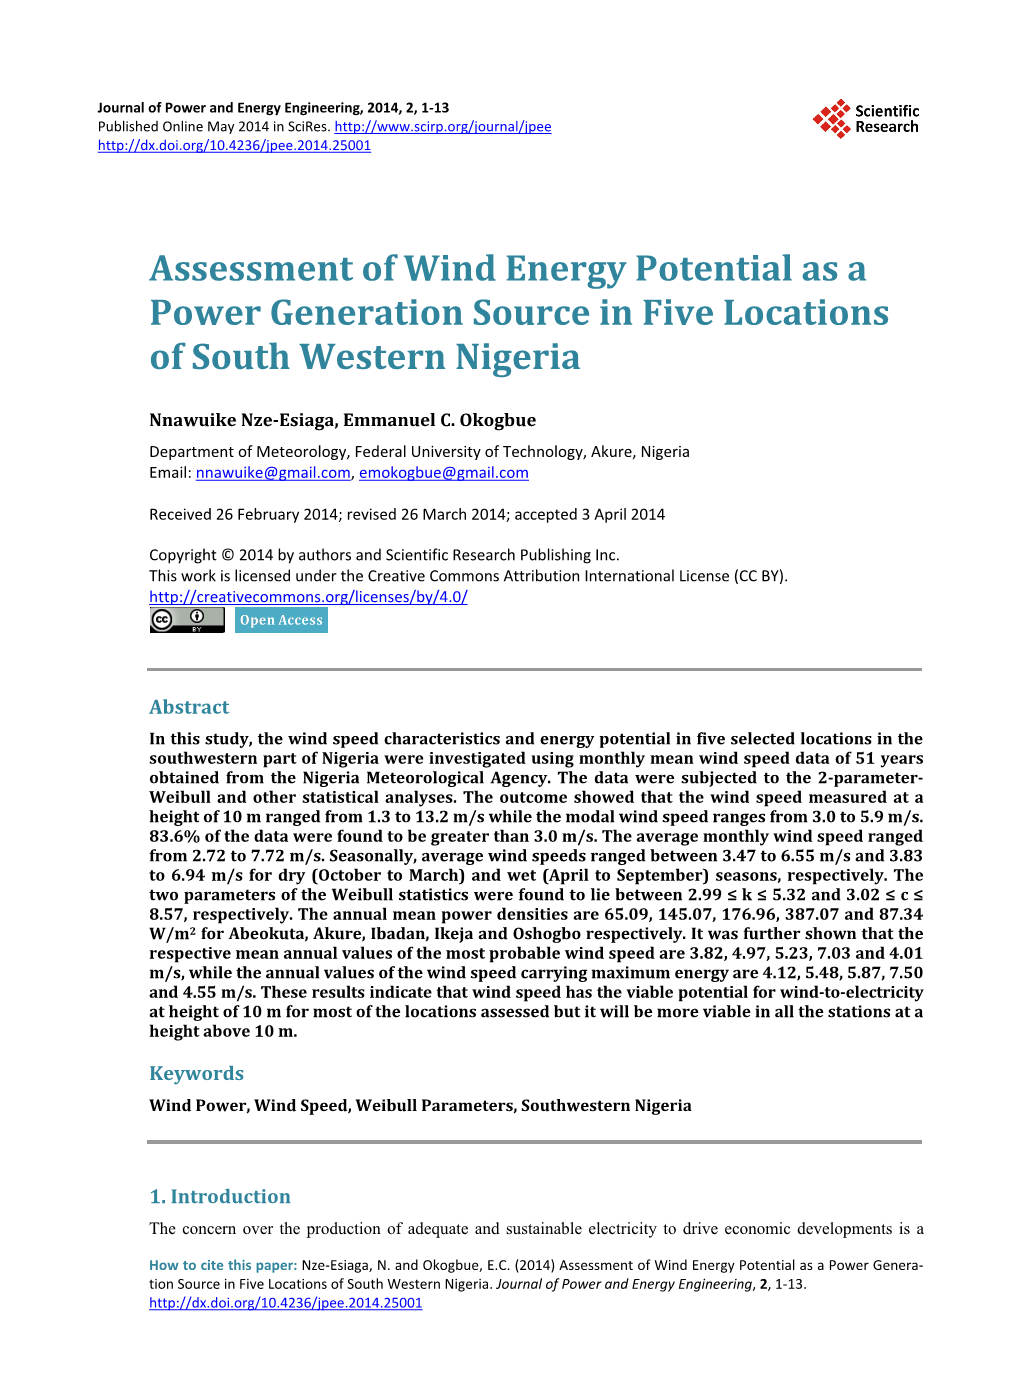 Assessment of Wind Energy Potential As a Power Generation Source in Five Locations of South Western Nigeria